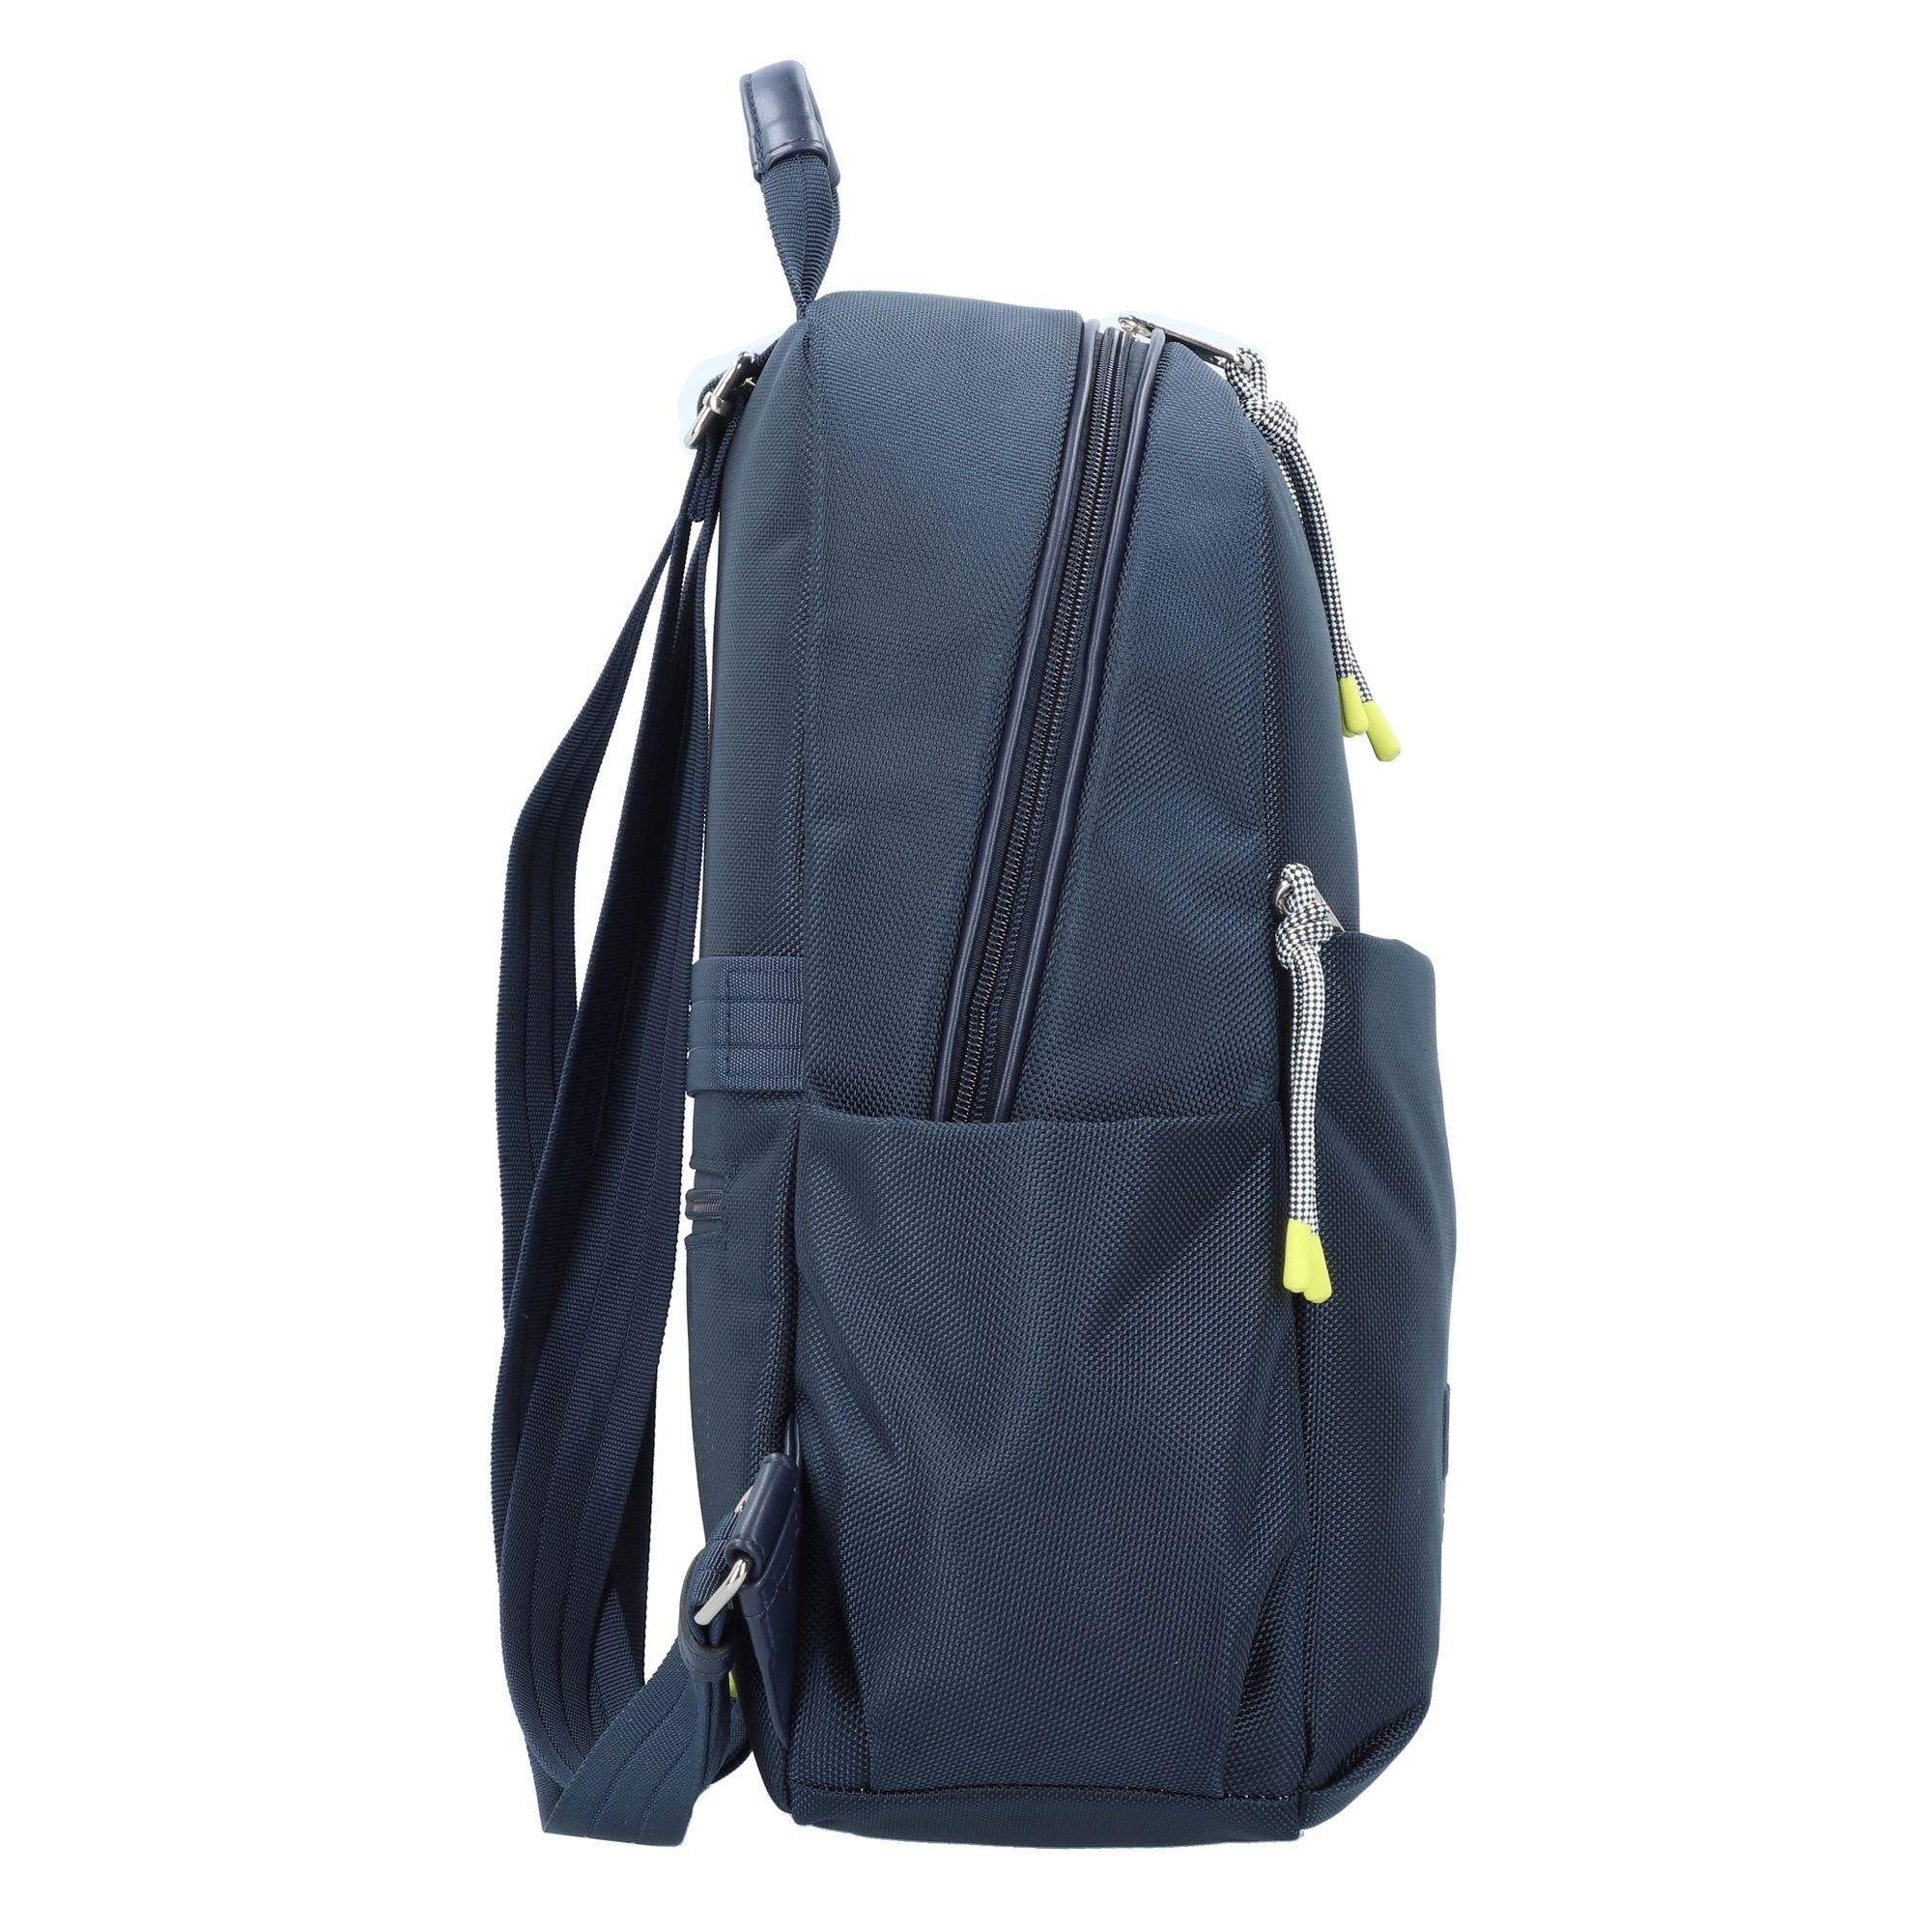 Daypack one, Picard Lucky navy Nylon